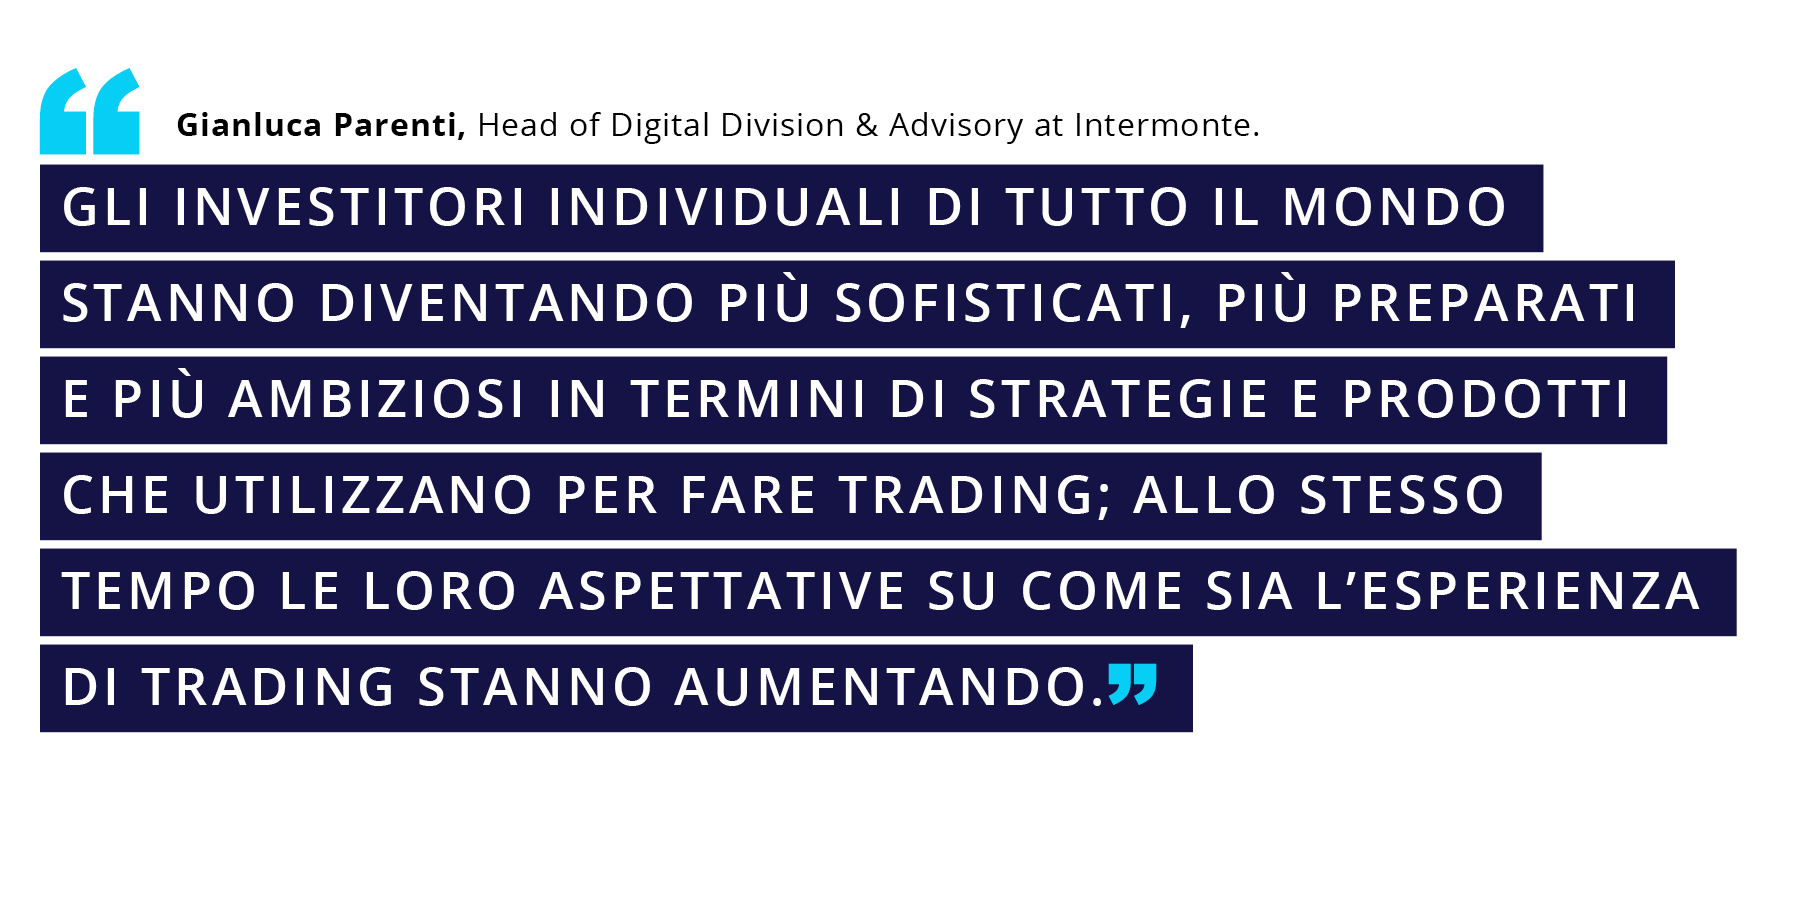 Quote from Intermonte